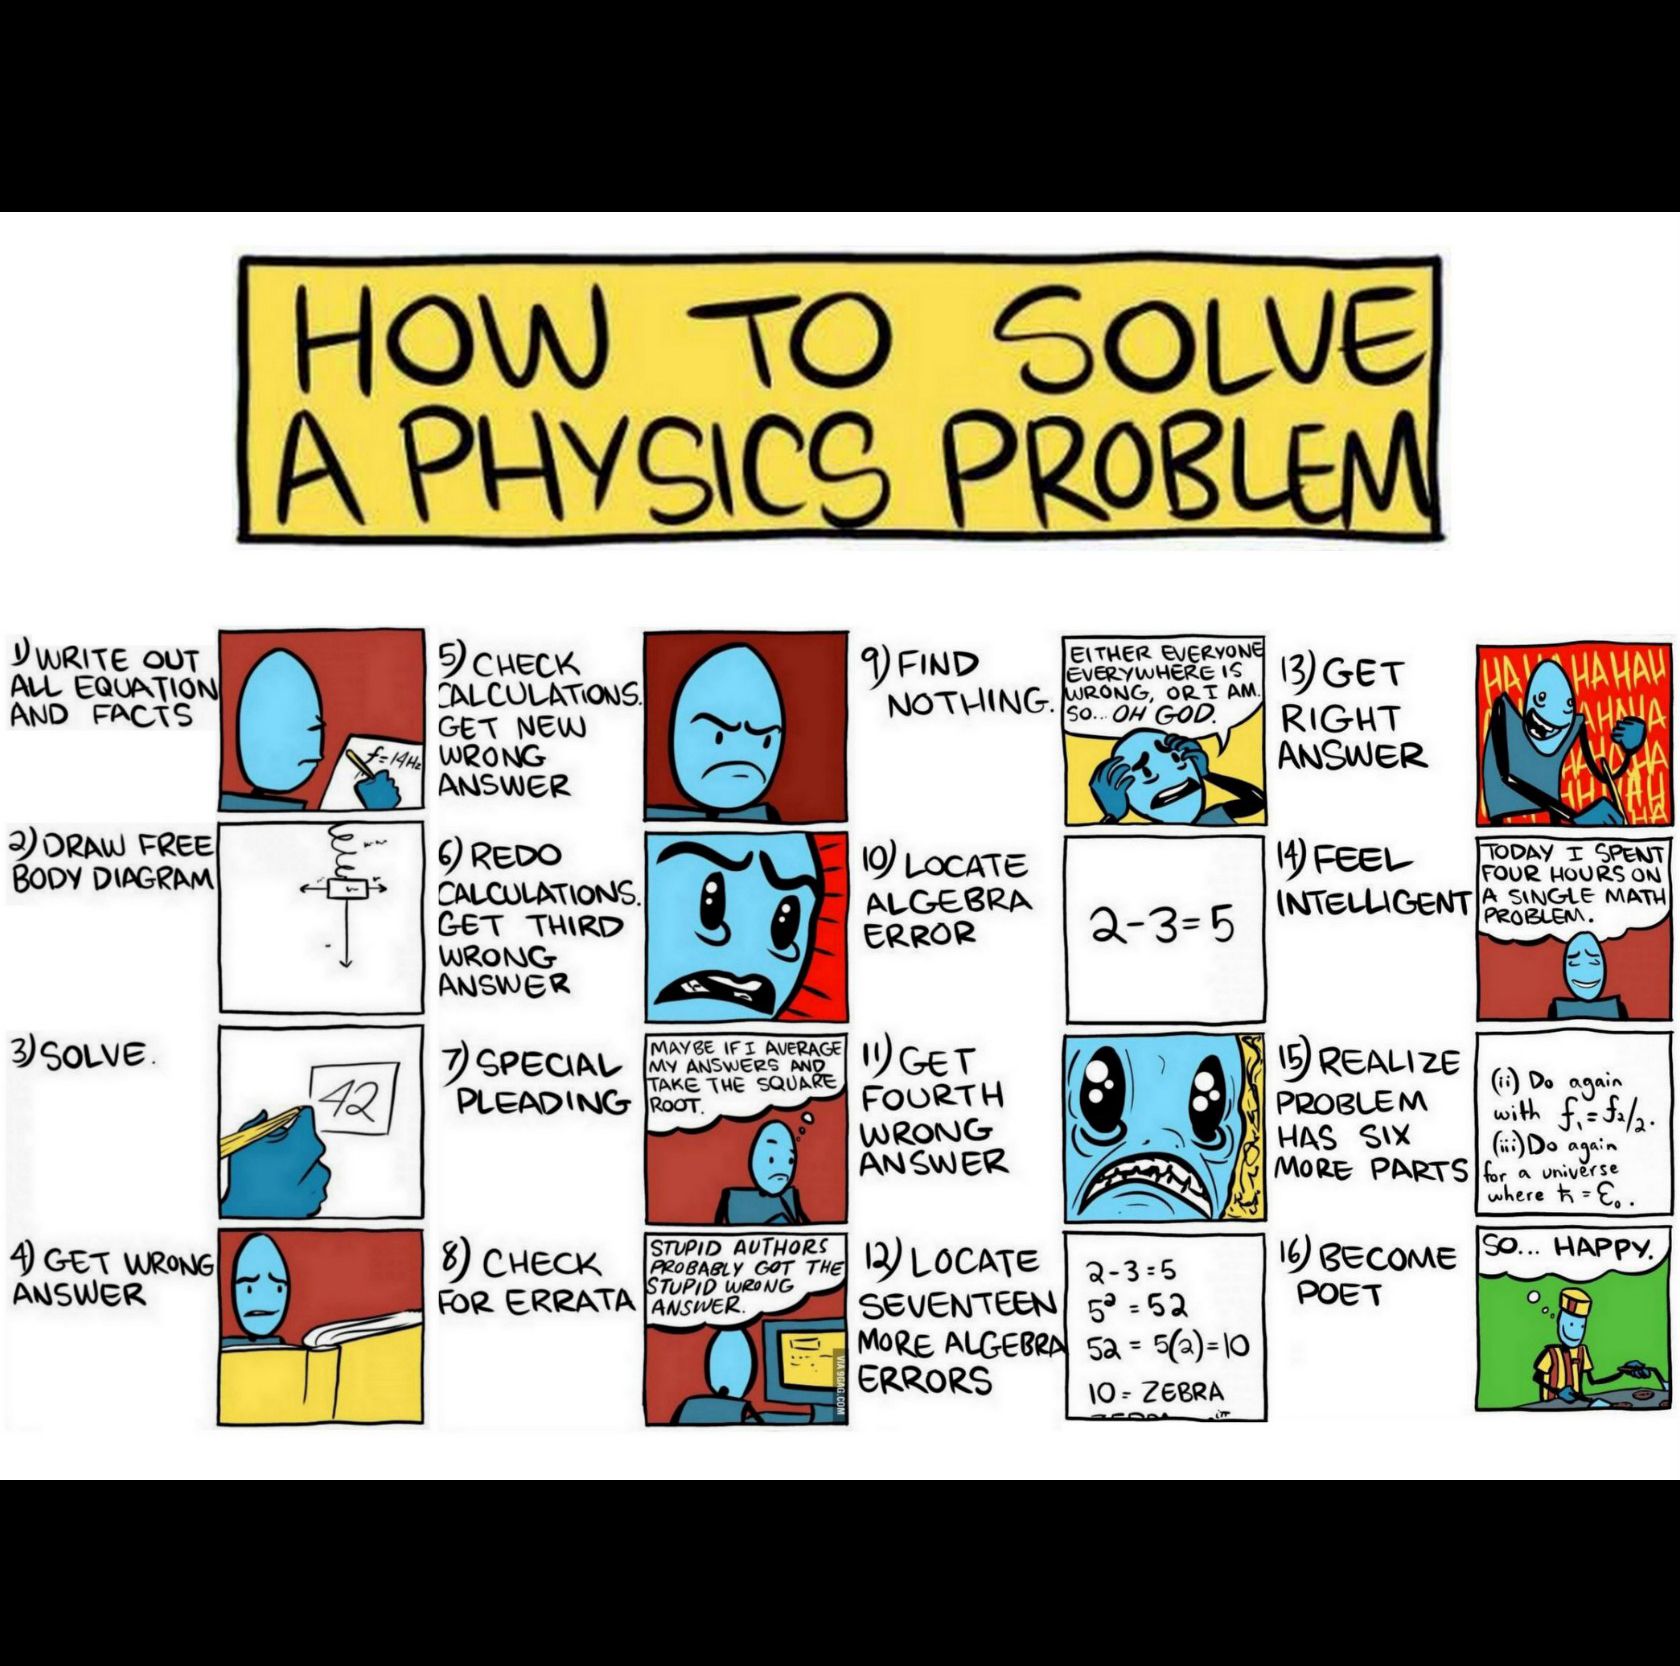 ð How to solve physics problem. cupsoguepictures.com: How to Solve ...